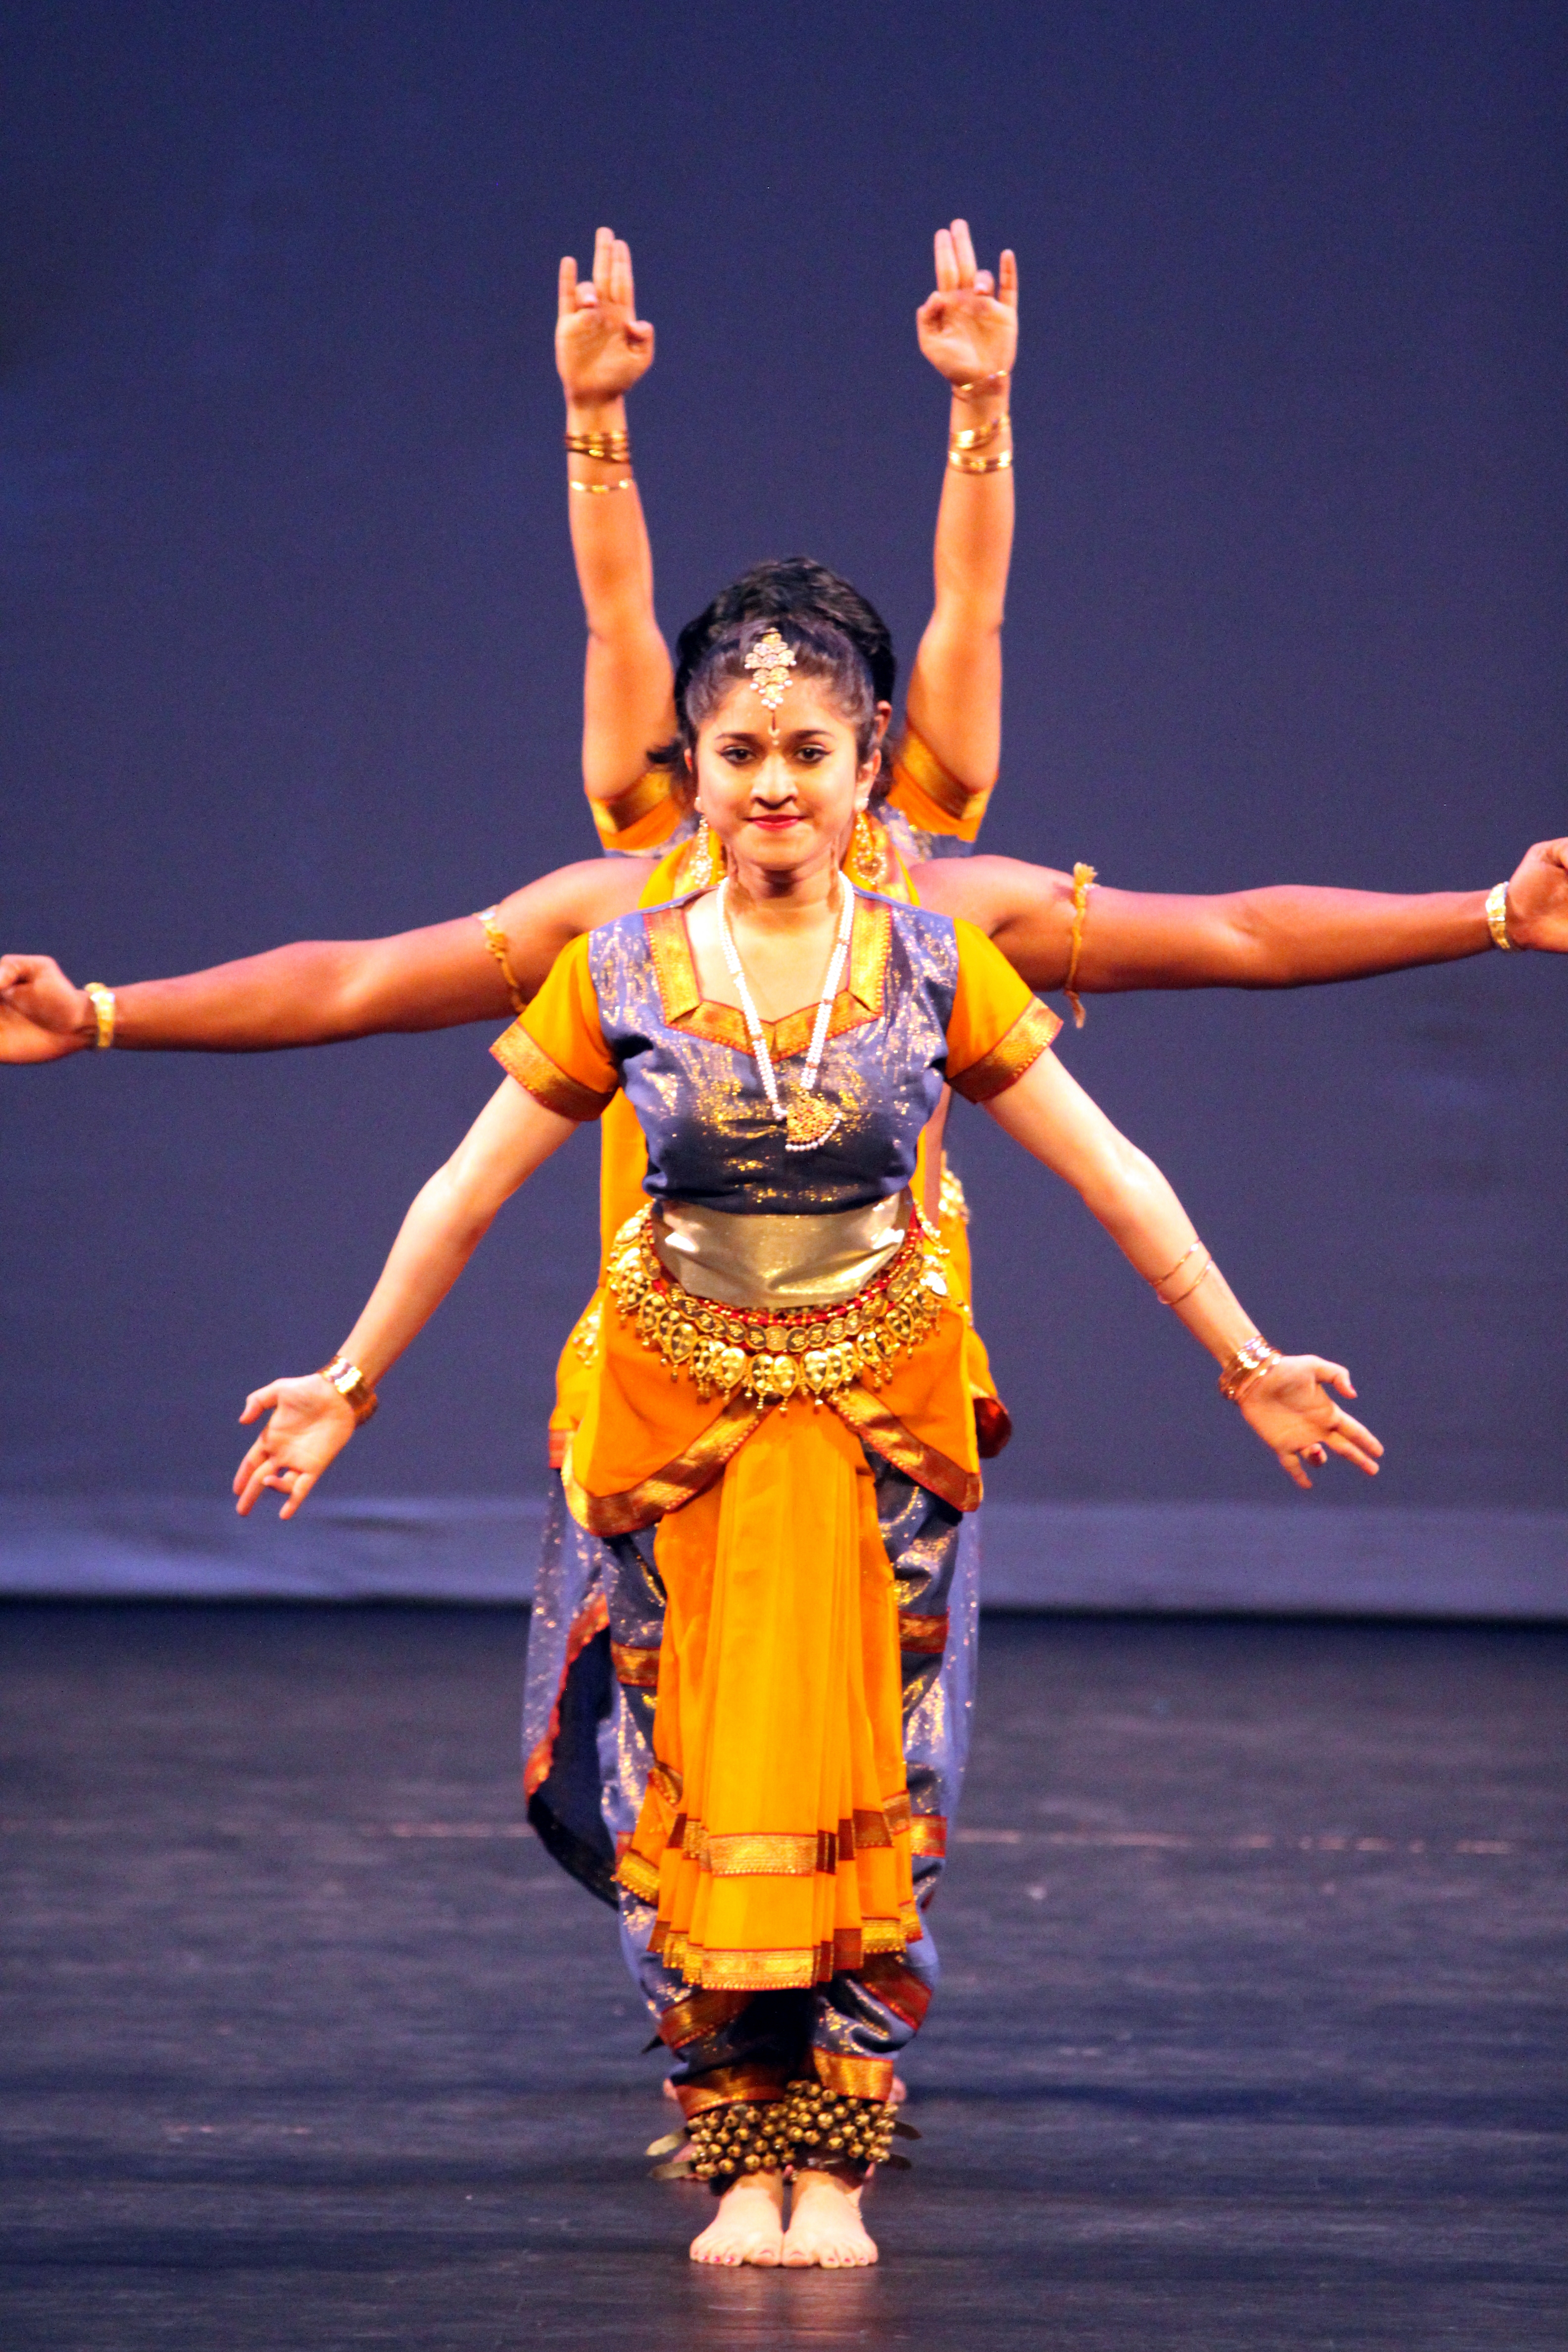 file-indian-dance-multiple-arms-jpg-wikimedia-commons